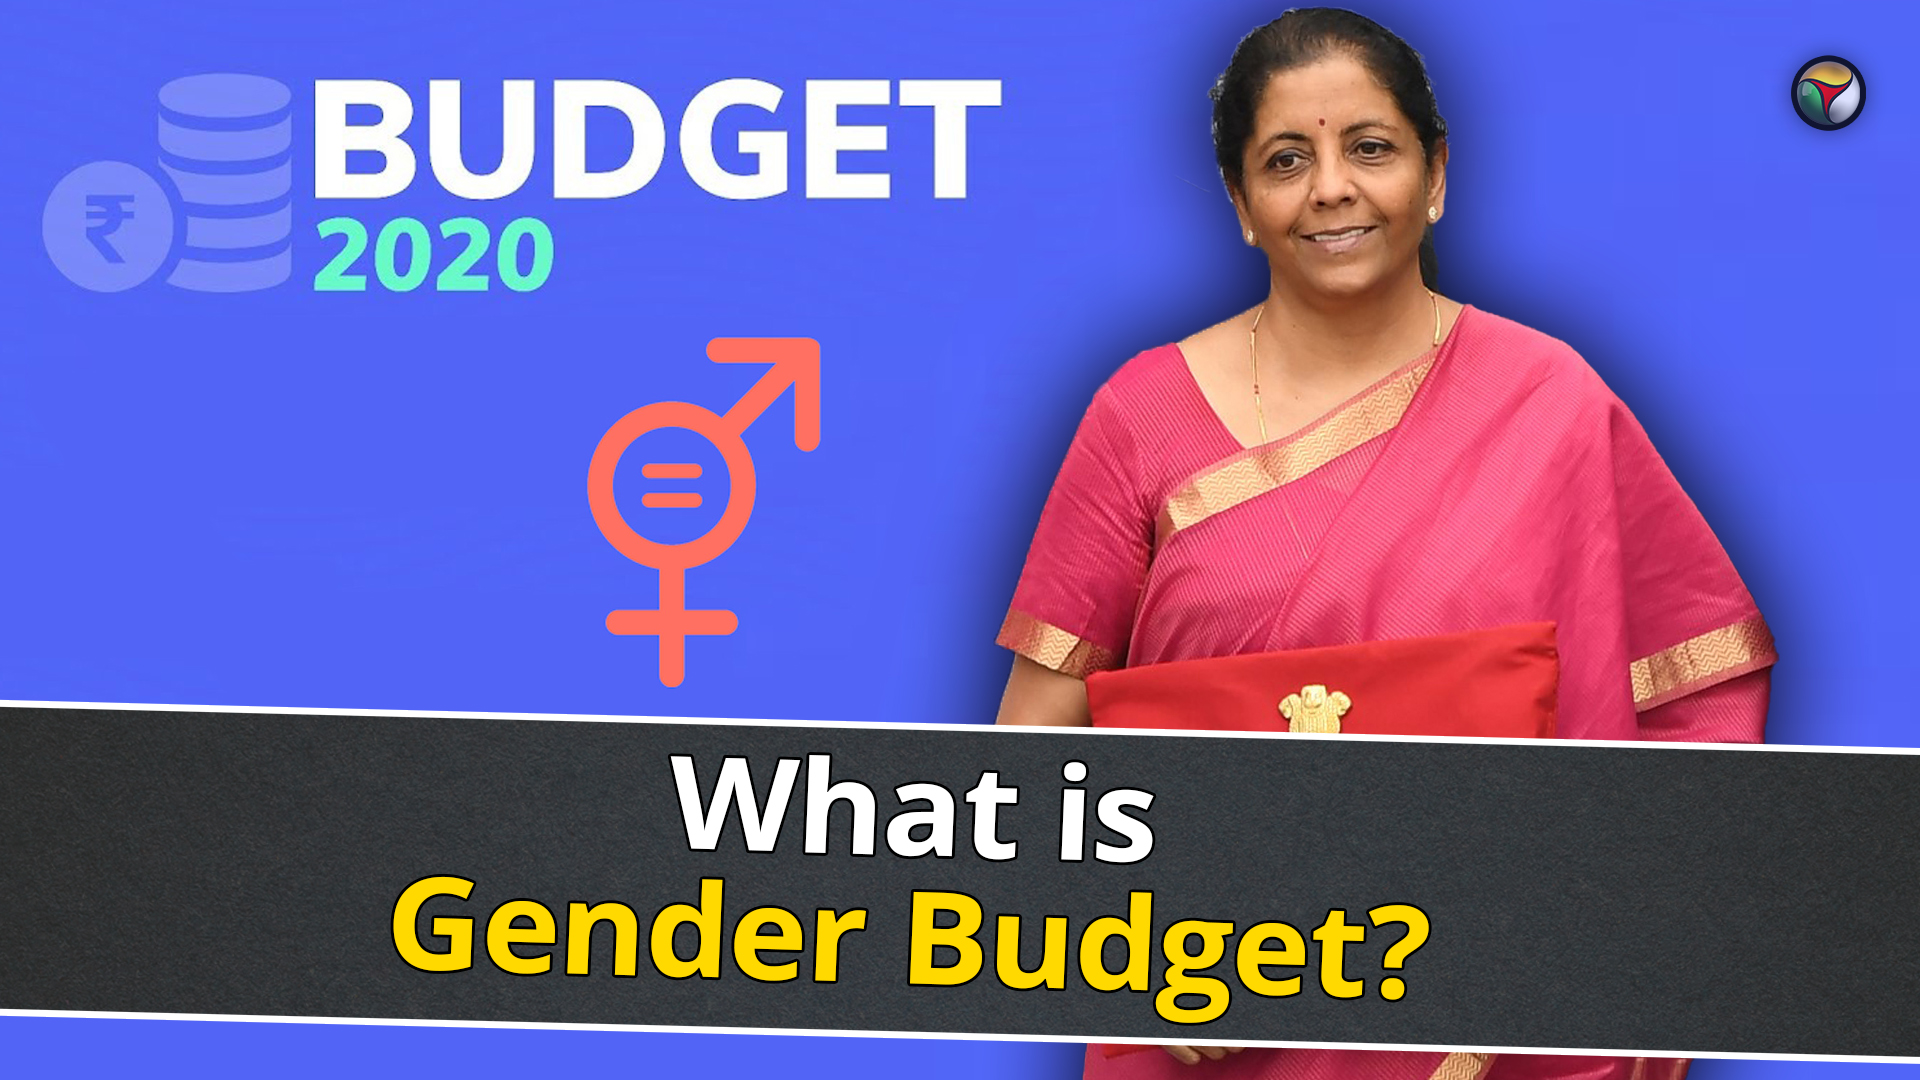 Gender budget: Making it count for women